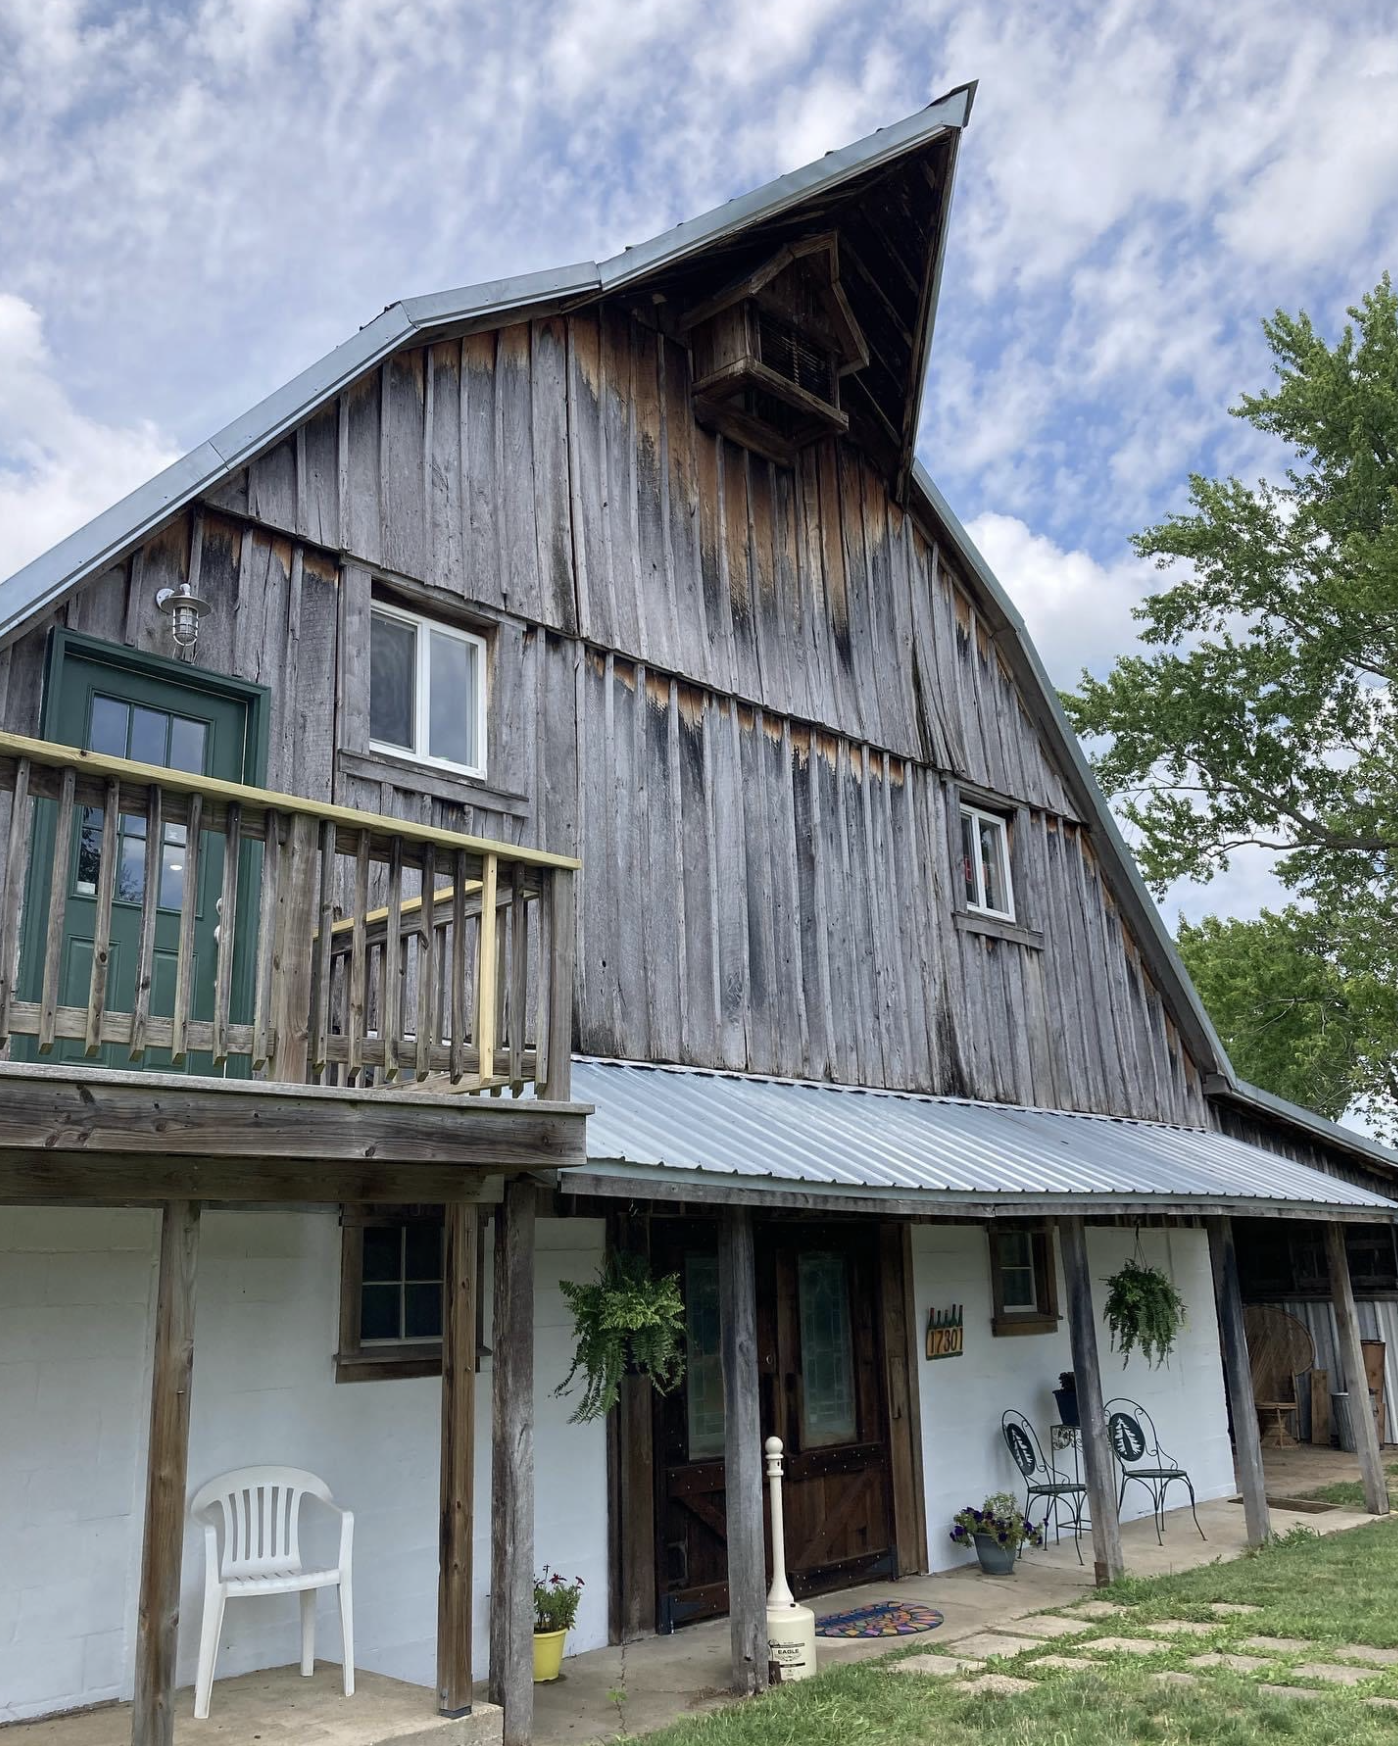 Prairie Barn Winery- A wooden barn style building with a deck and seating.